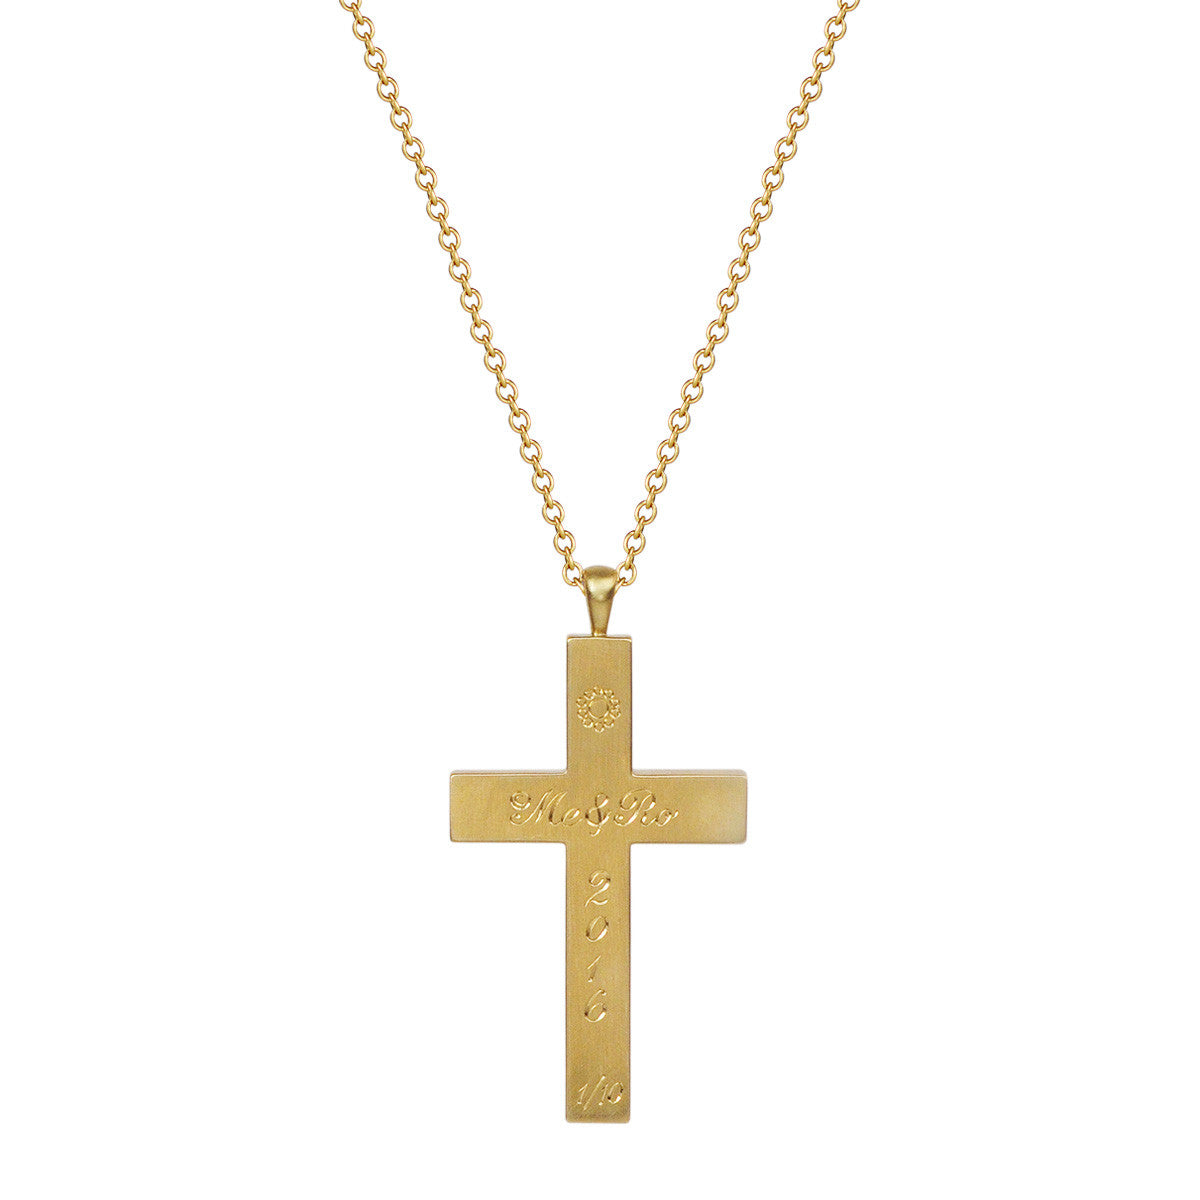 18K Gold Ebony Cross Pendant with Inlaid Gold Flowers and Diamonds